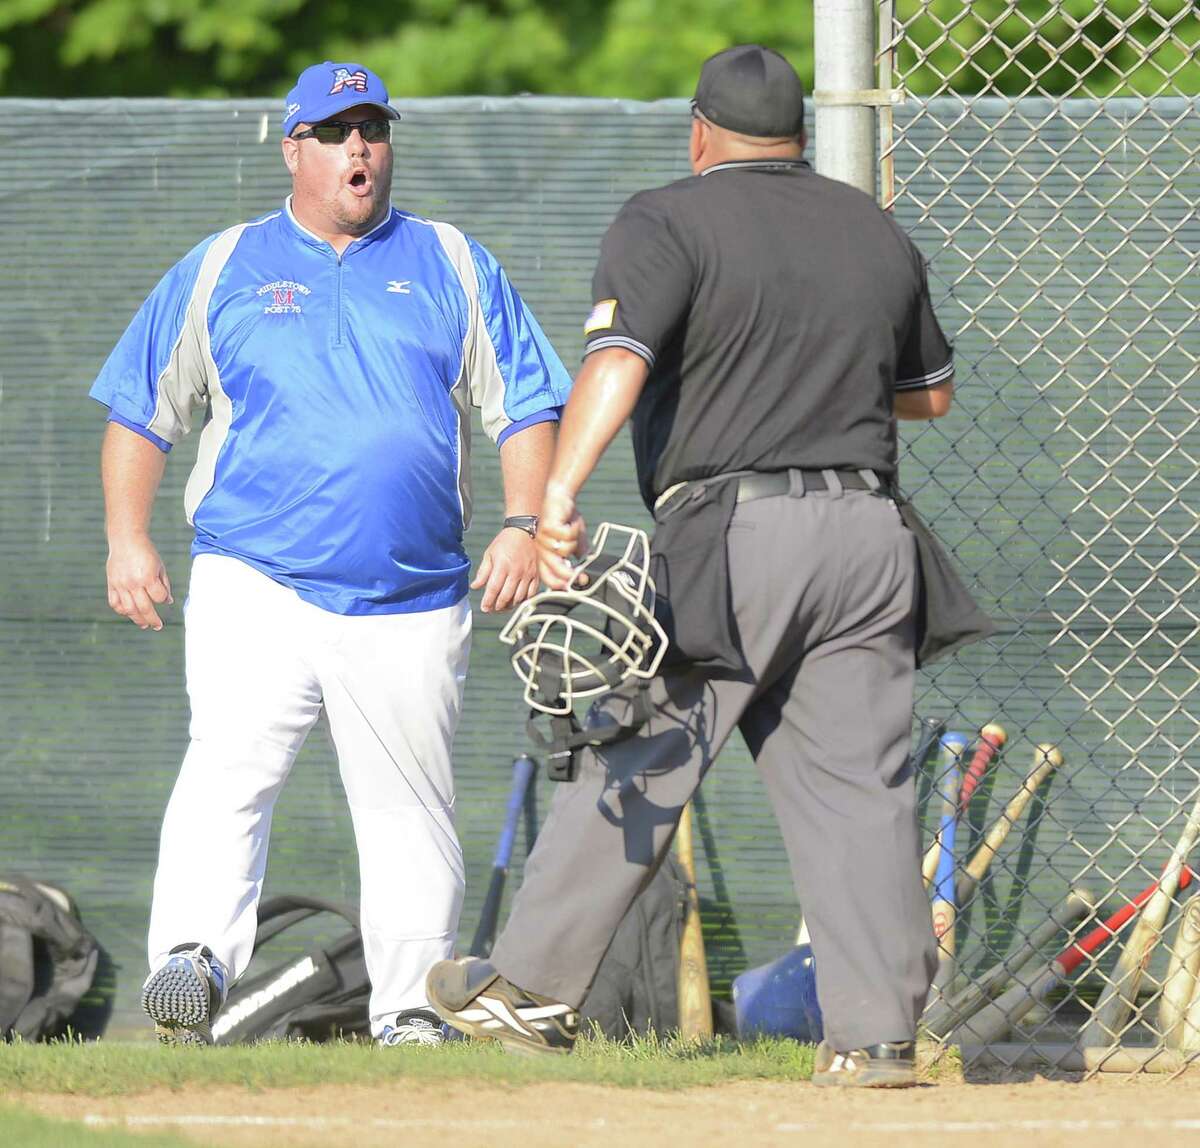 In this photo from last year’s state tournament, Middletown coach Tim D’Aquila argues with umpire Pete Stokes during a game against Greenwich.